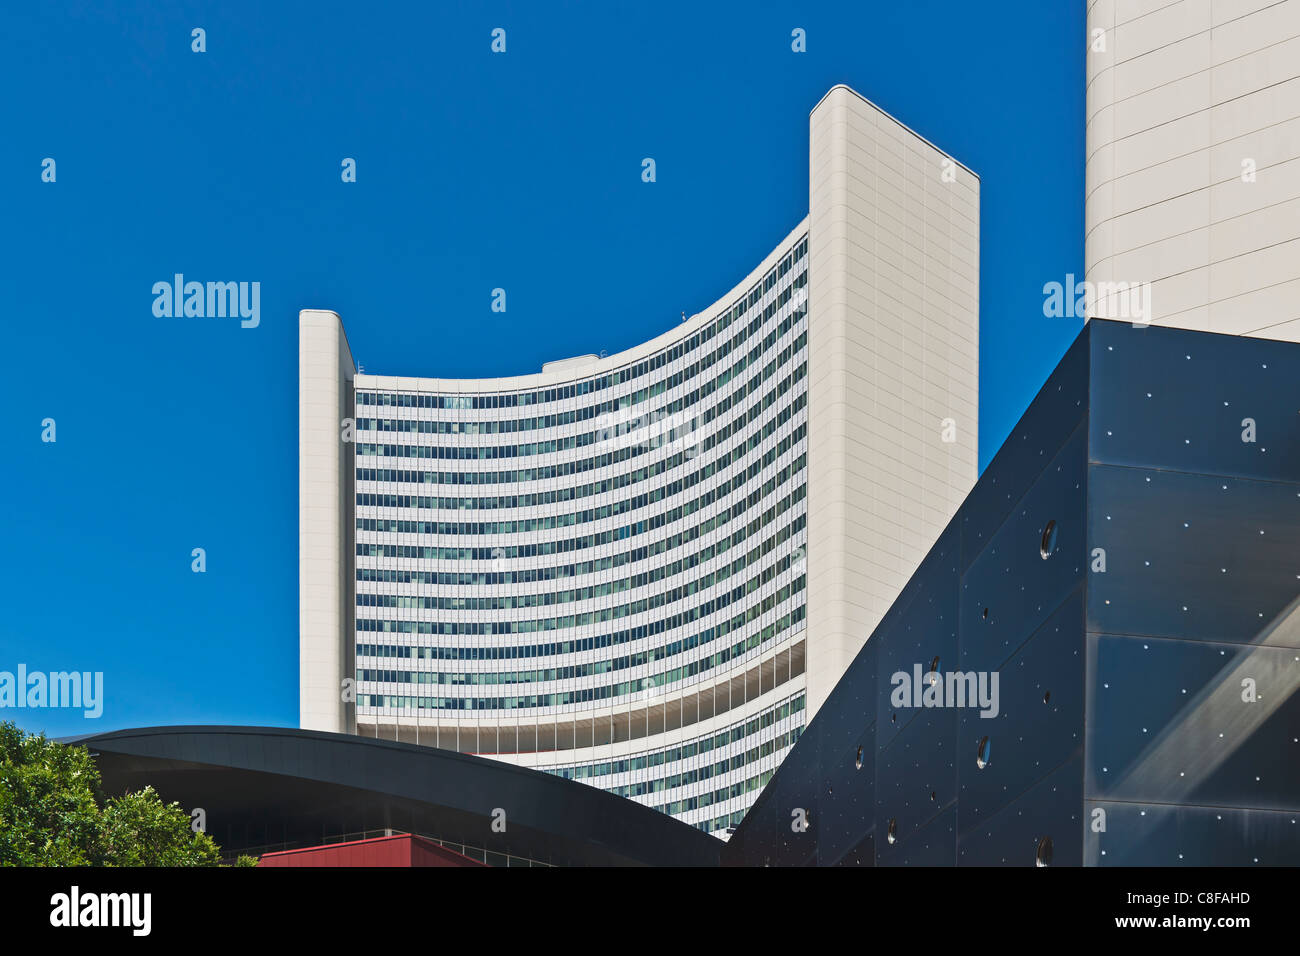 Building of the International Atomic Energy Agency in Vienna International Center (VIC), commonly known as UNO City Austria Stock Photo